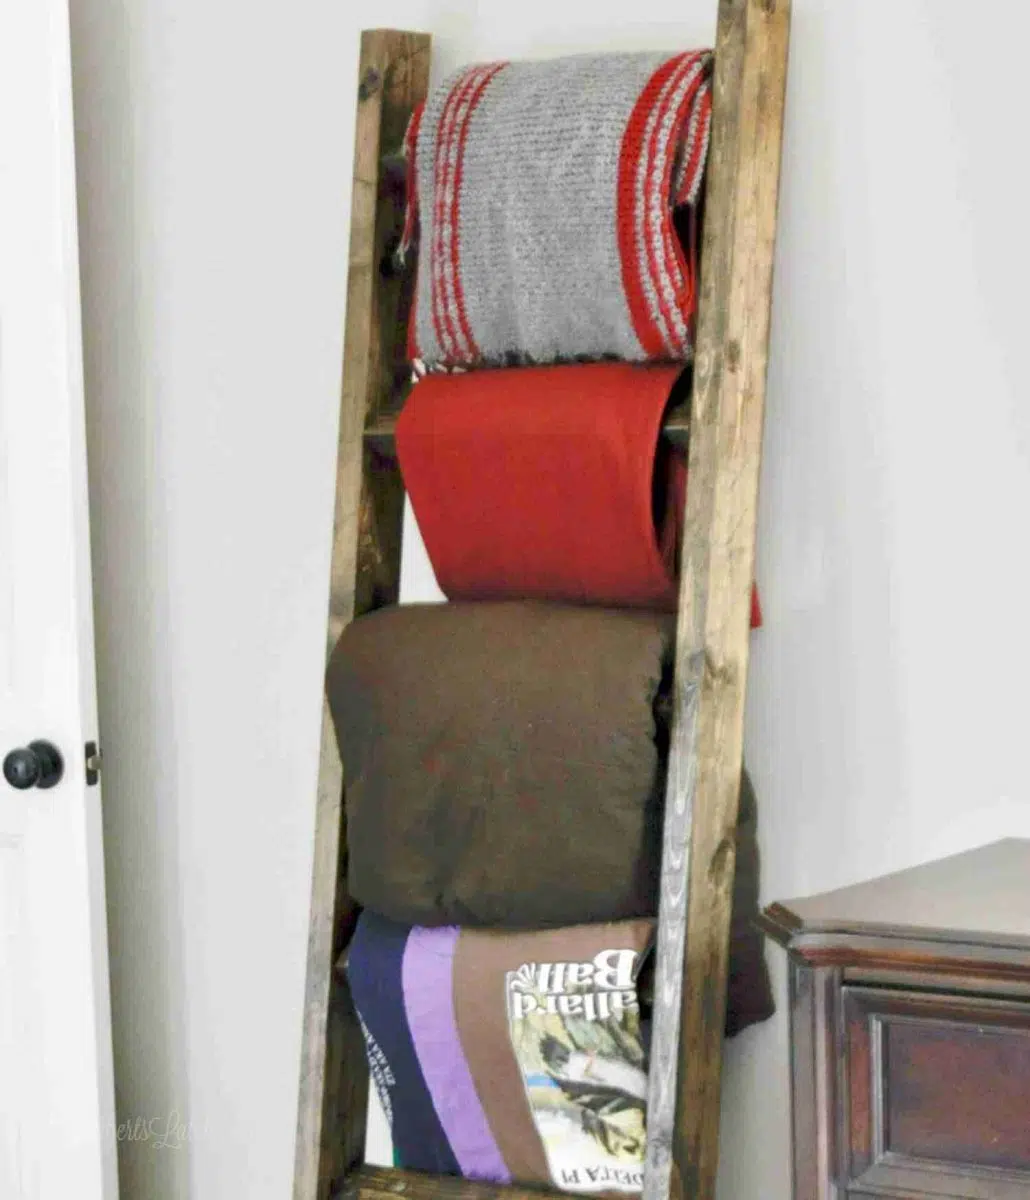 blanket ladder full of blankets leaning against a wall.